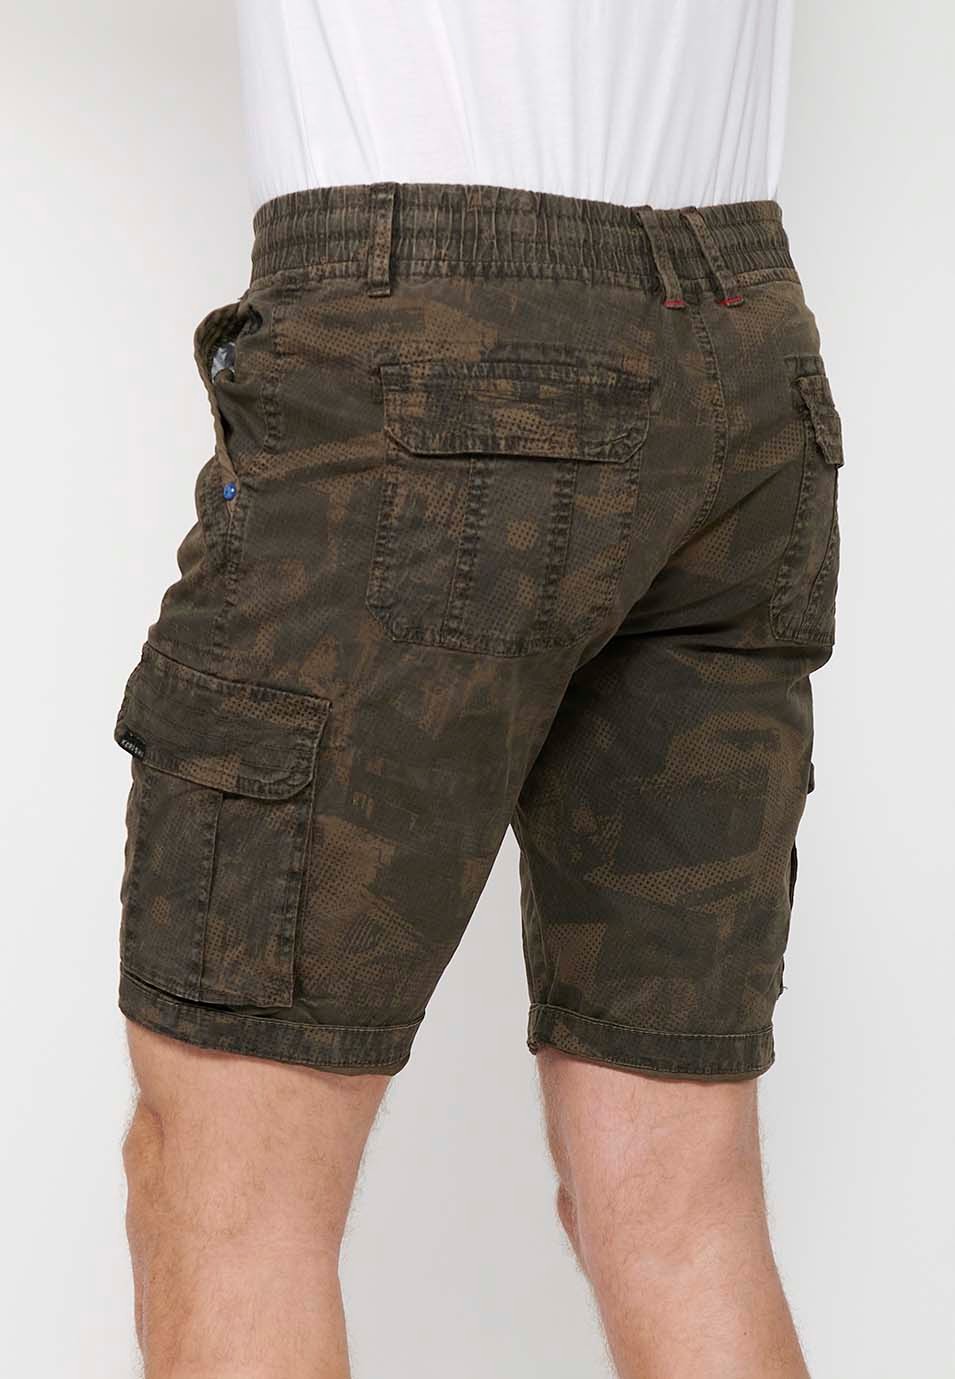 Cargo shorts with front closure with zipper and button and four pockets, two rear pockets with flap with two cargo pockets with flap and adjustable waist with drawstring in Khaki color for men 7